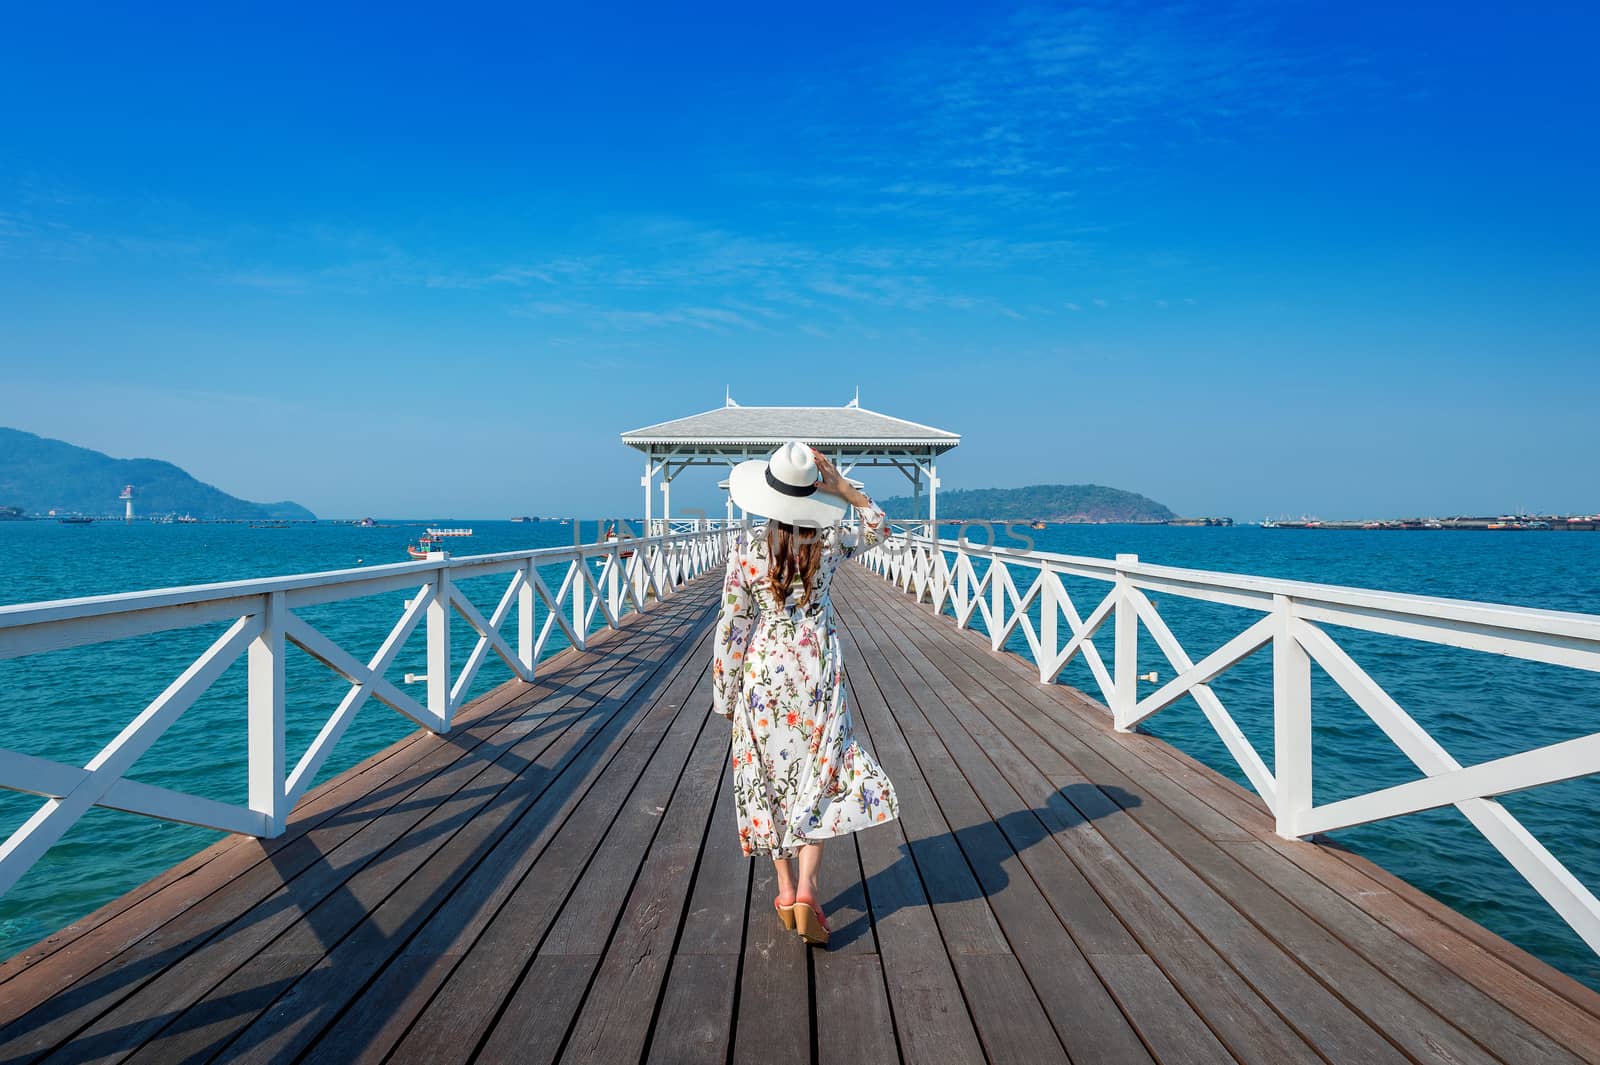 Young woman walking on wooden bridge in Si chang island, Thailan by gutarphotoghaphy